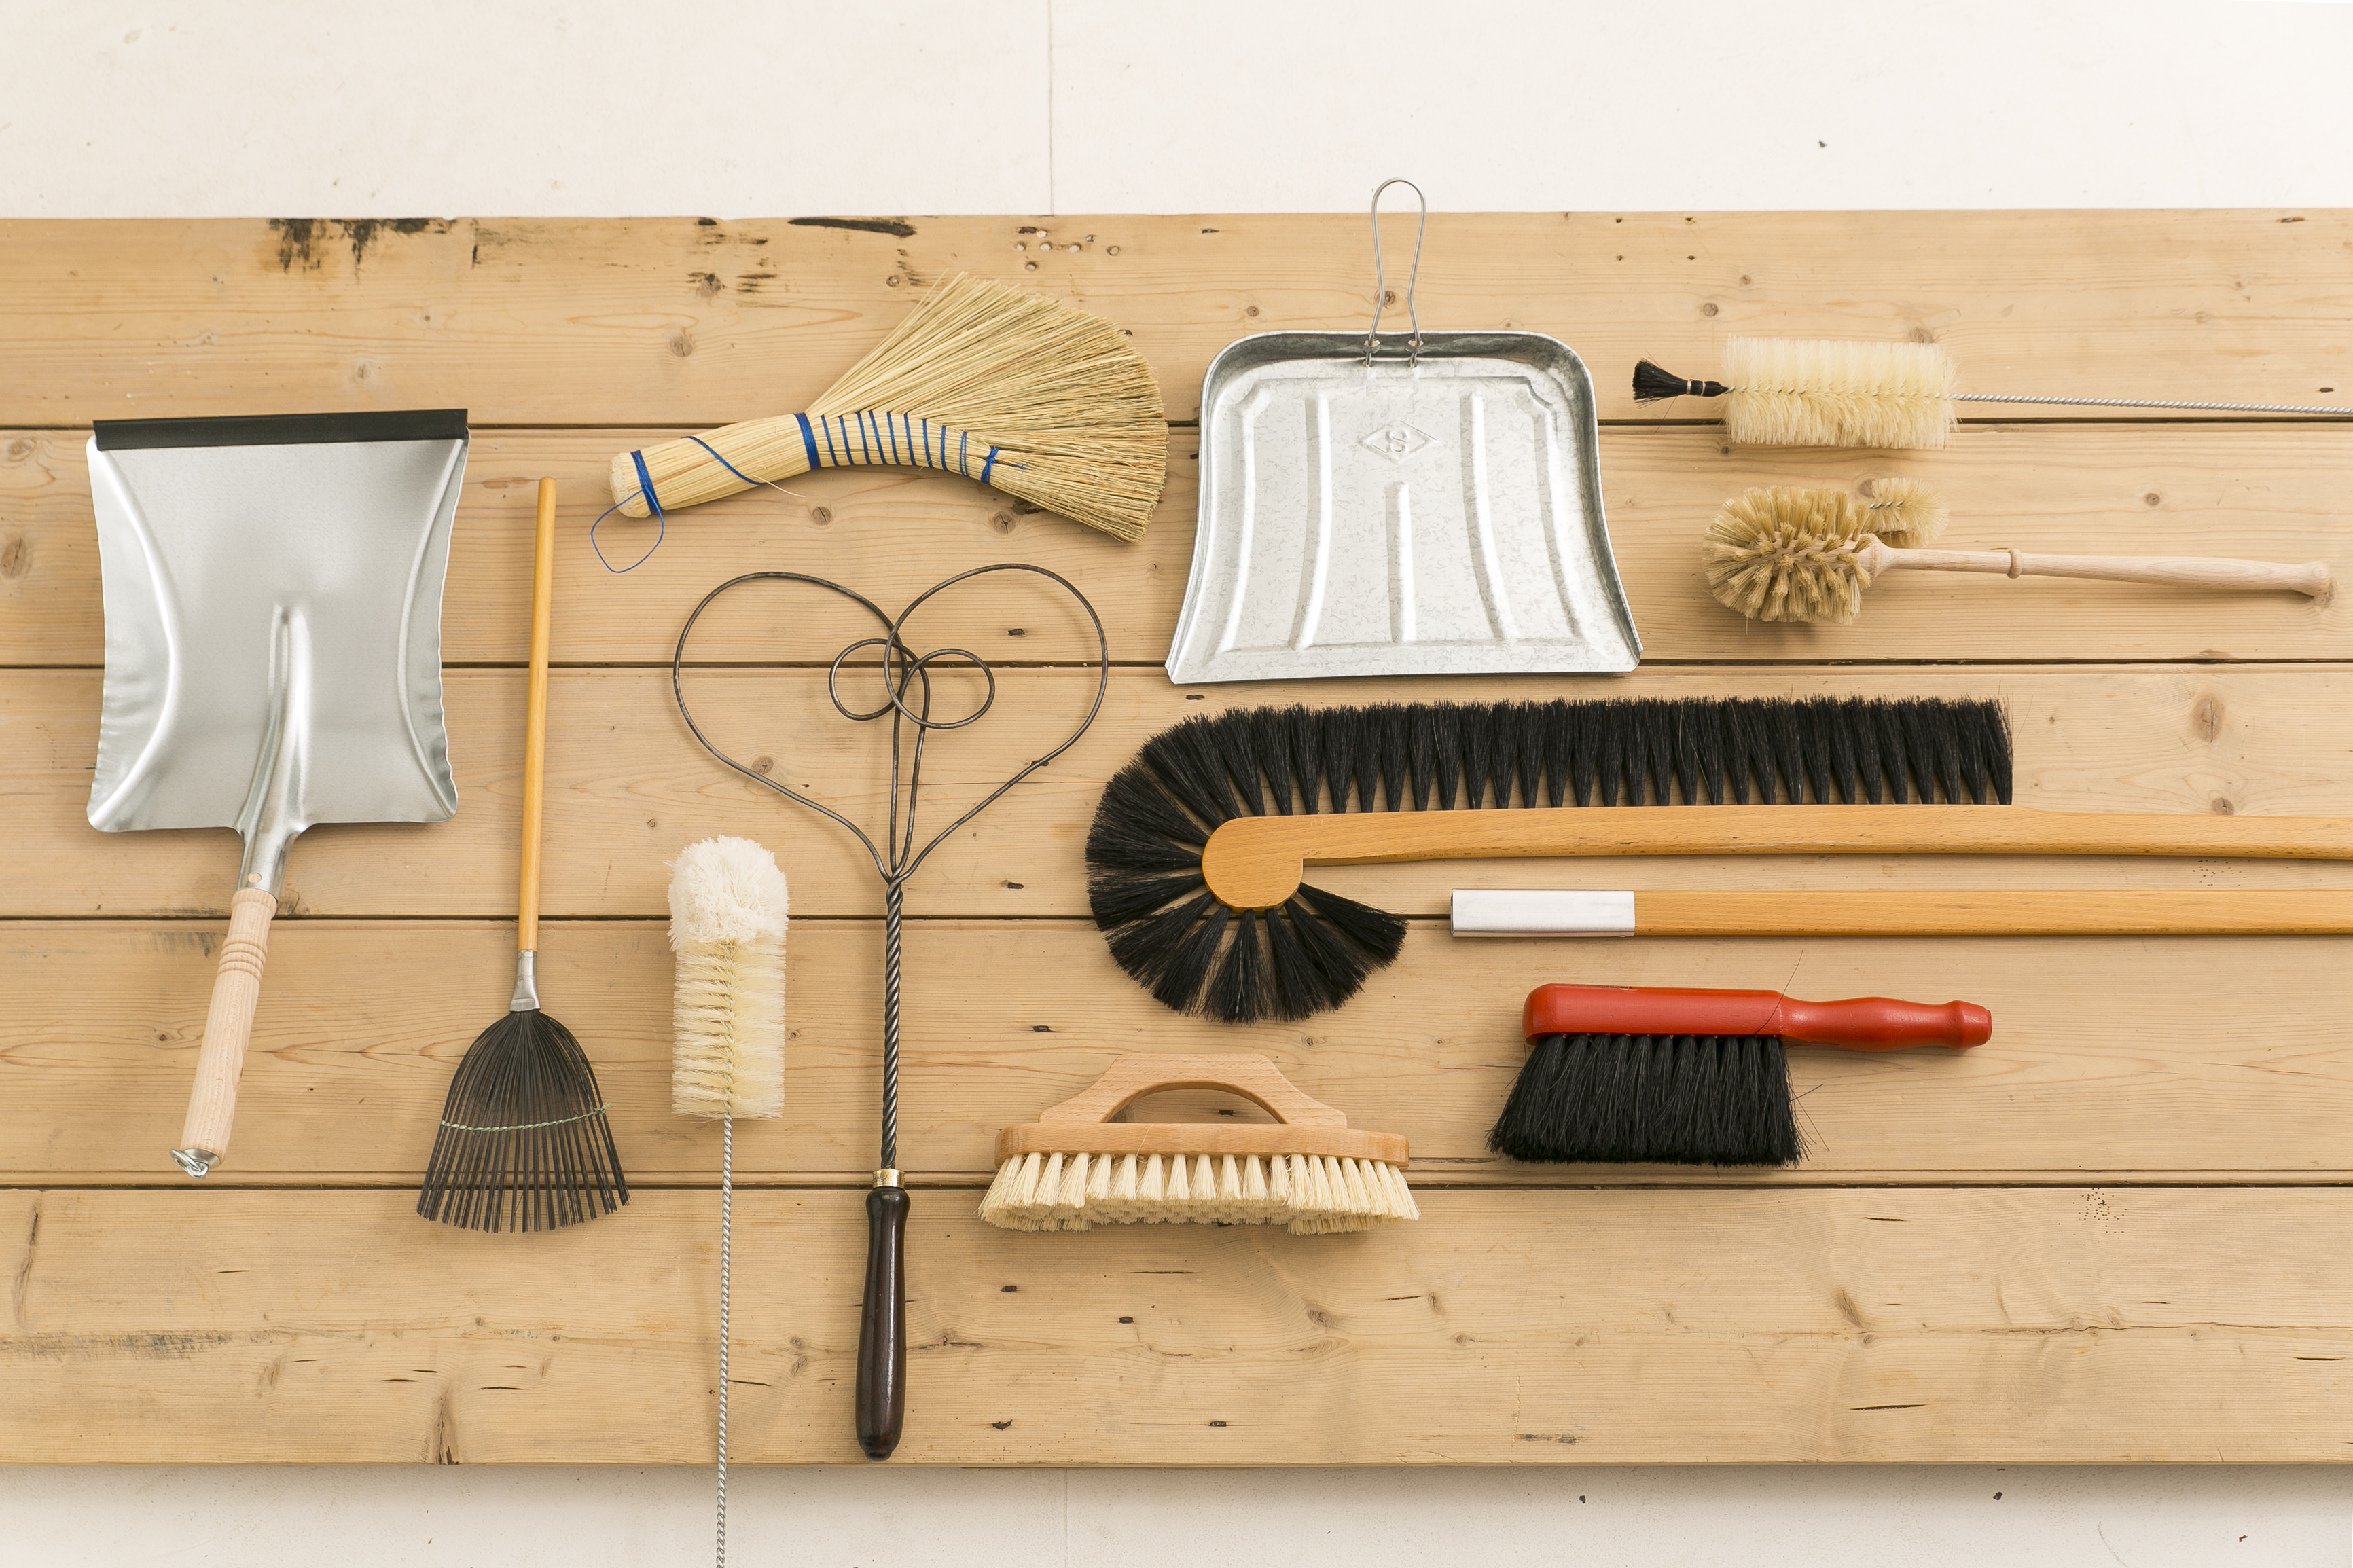 (l-r) Dustpan, £9; Fly Swat, £9; Bottle Brush, £6.75; Rice Straw Hand Brush, £7.50; (heart shaped) Old Carpet Beater, £14.50; Dustpa ?; Extending Cupboard Brush, £35; Red Handled Brush, £6.50; Bottle Brush, £7; Loo Brush with Rim Cleaner, £8, RE for the Home (RE for the home/PA)